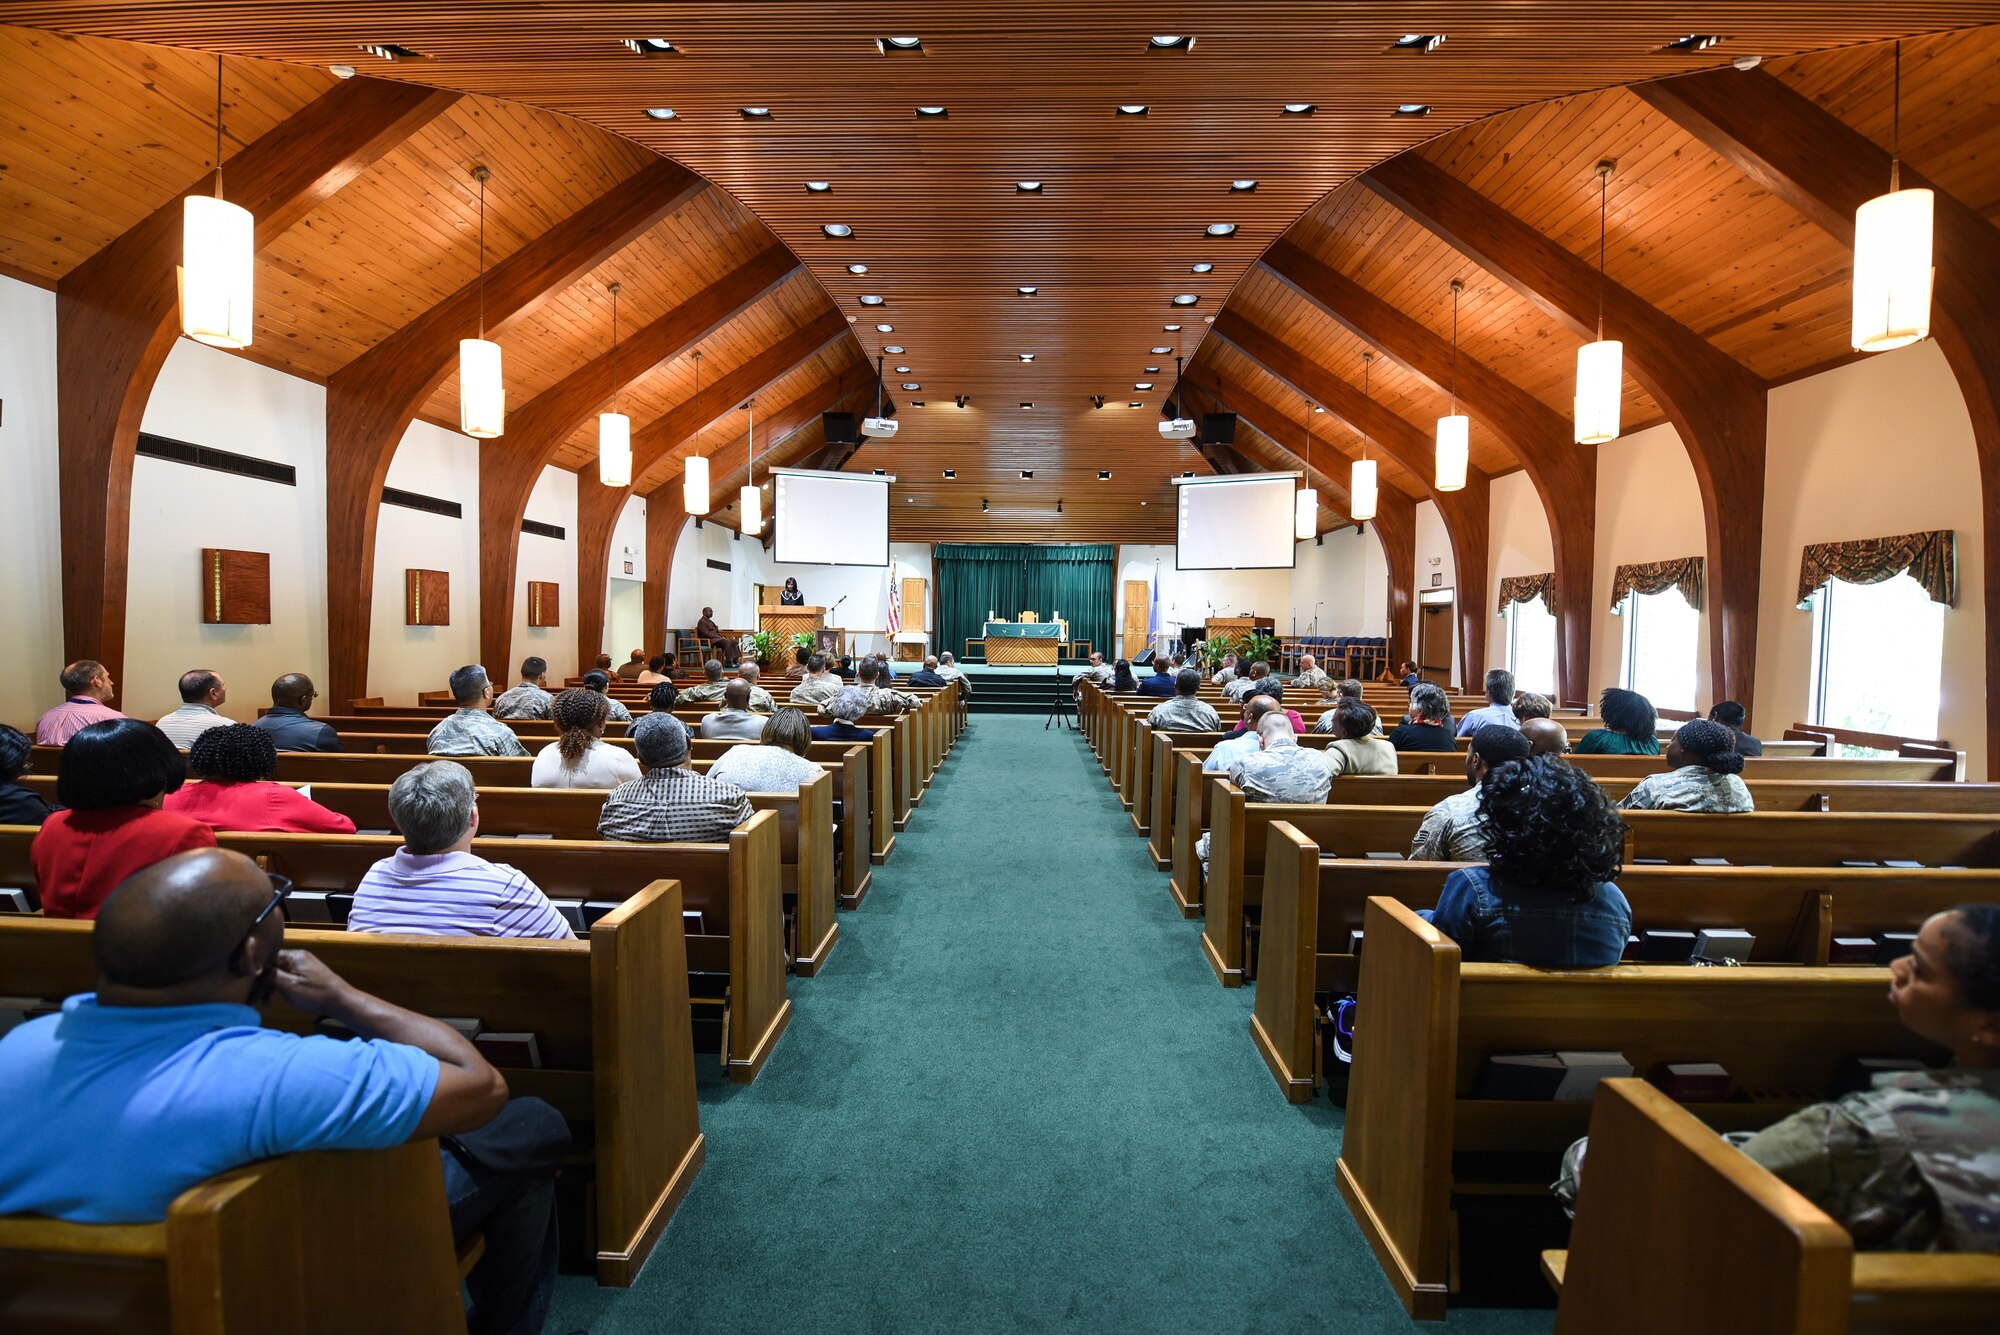 Nearly 100 Air Commandos, active duty and retired, gather for the annual Martin Luther King Jr. Commemorative Service at the Hurlburt Field Chapel, Jan. 12, 2017. King was a minister and leader during the Civil Rights Movement, best known for his role in the advancement of civil rights using nonviolent civil disobedience. (U.S. Air Force photo by Senior Airman Jeff Parkinson)